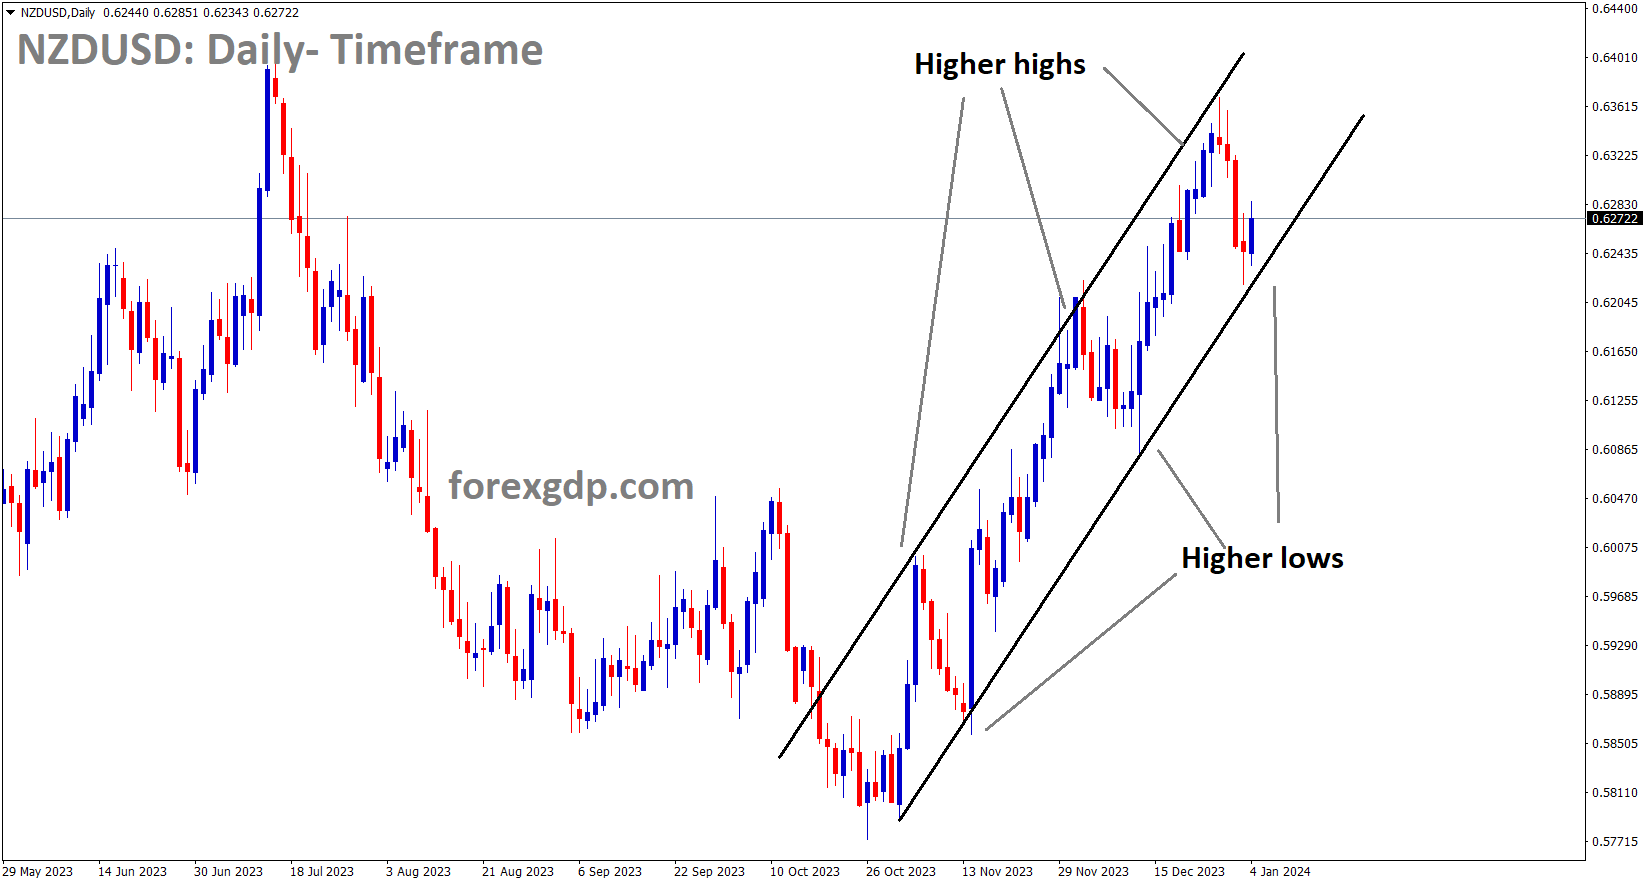 NZDUSD is moving in an Ascending channel and the market has rebounded from the higher low area of the channel